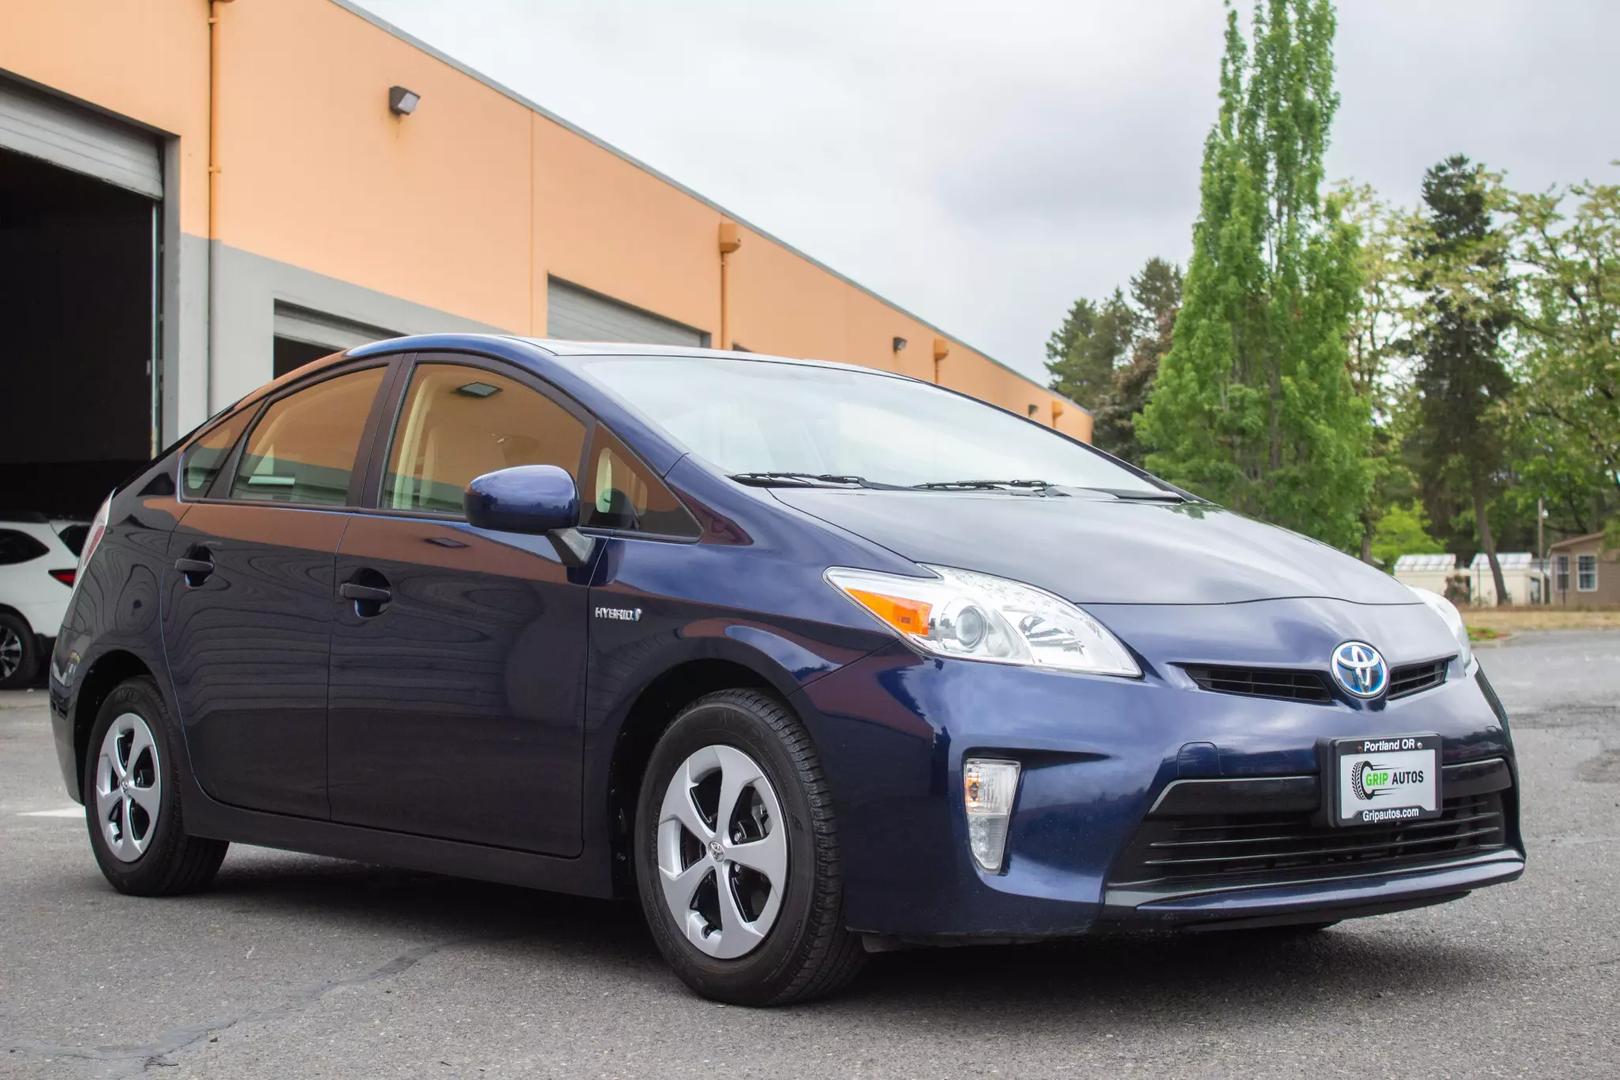 USED TOYOTA PRIUS 2015 for sale in Portland OR GRIP AUTOMOTIVE INC